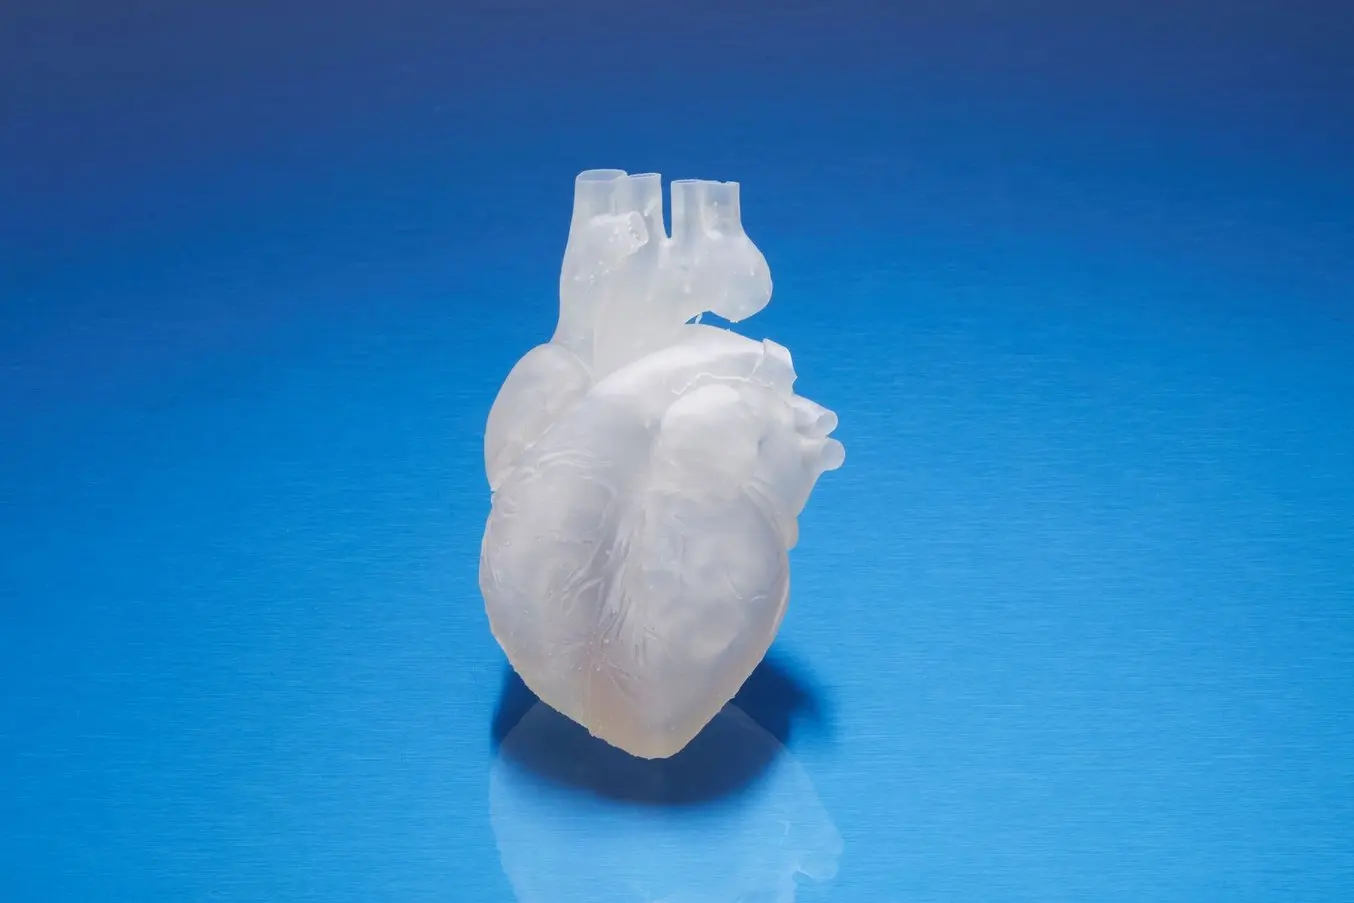 Clear, 3D printed model of a heart